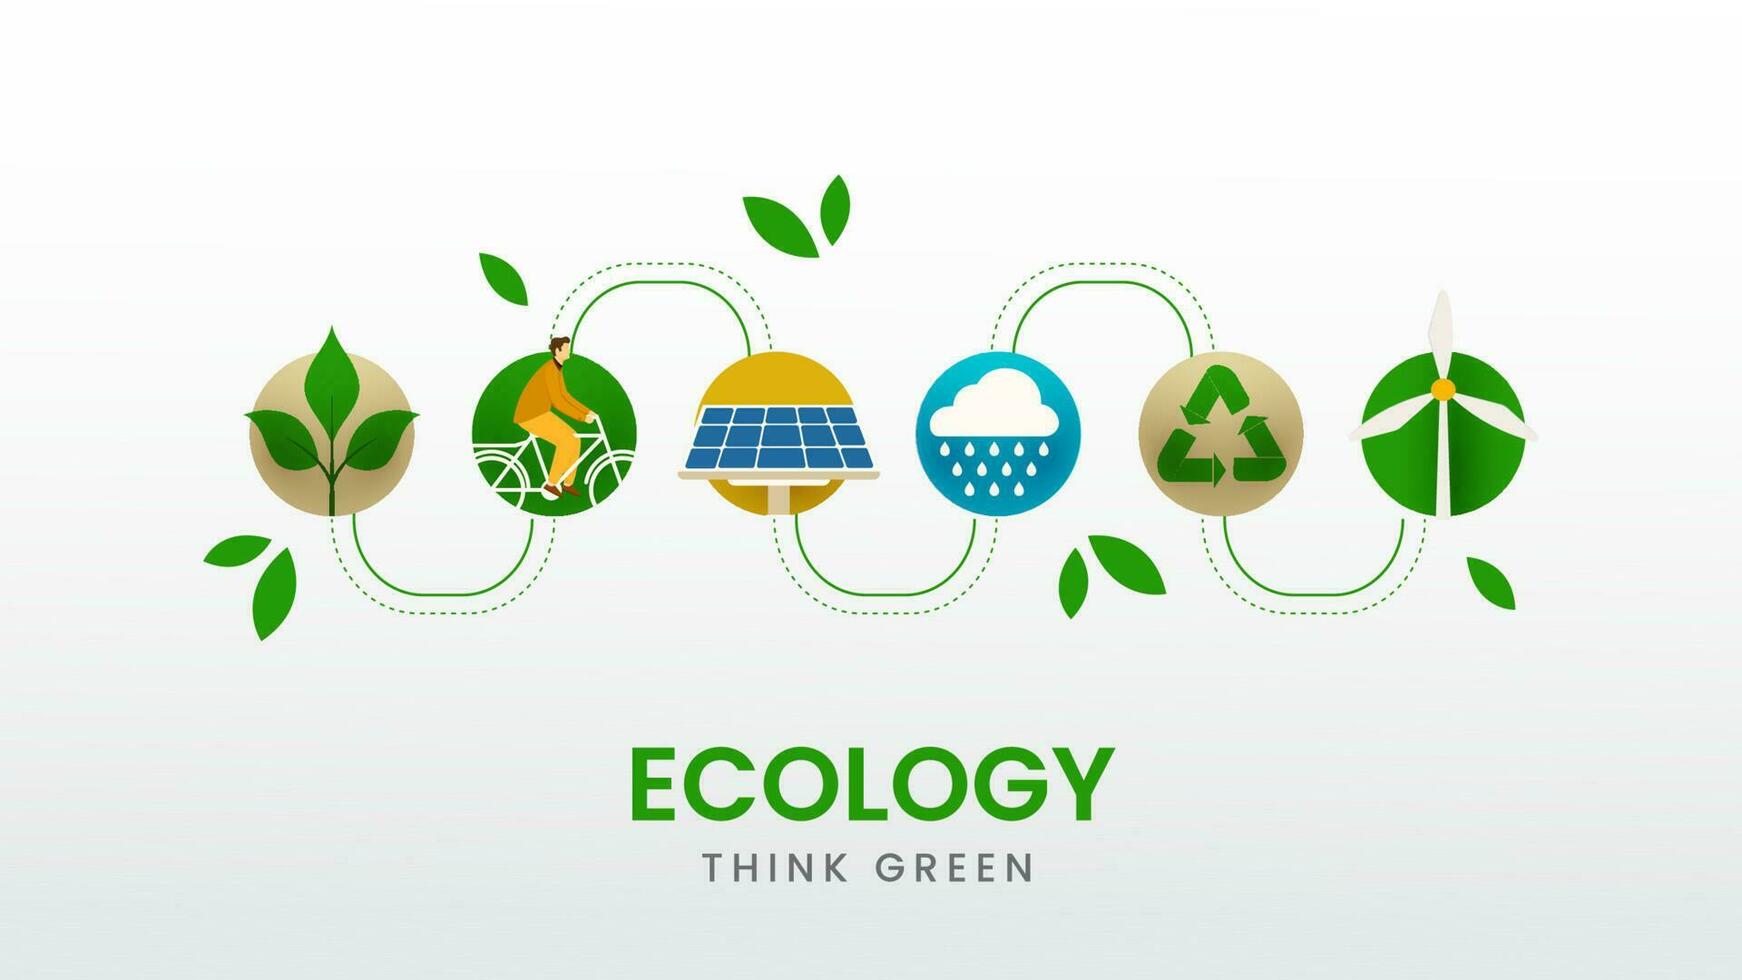 Ecology Think Green Banner Design With Planting, Cycling, Solar Panel, Rainy Cloud, Recycling, Windmill On White Background. vector